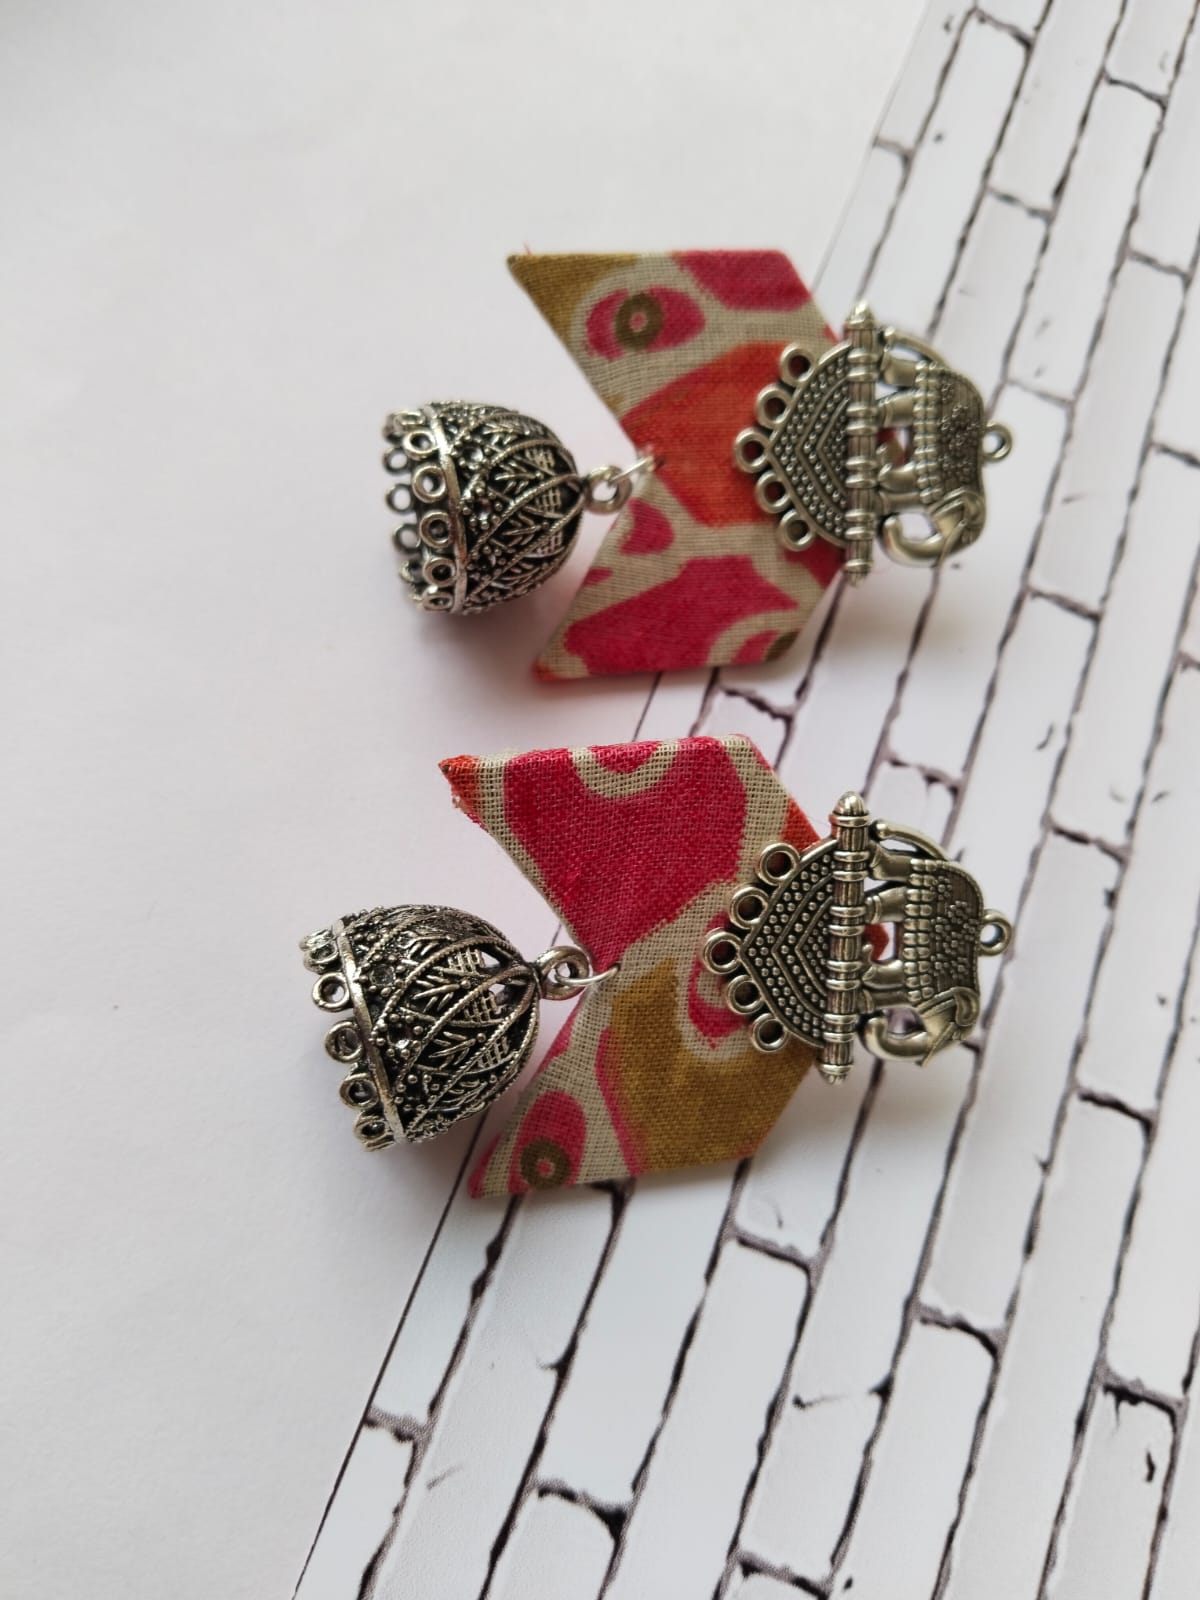 Orange printed earrings with silver jhumka and elephant charm on top on white backdrop